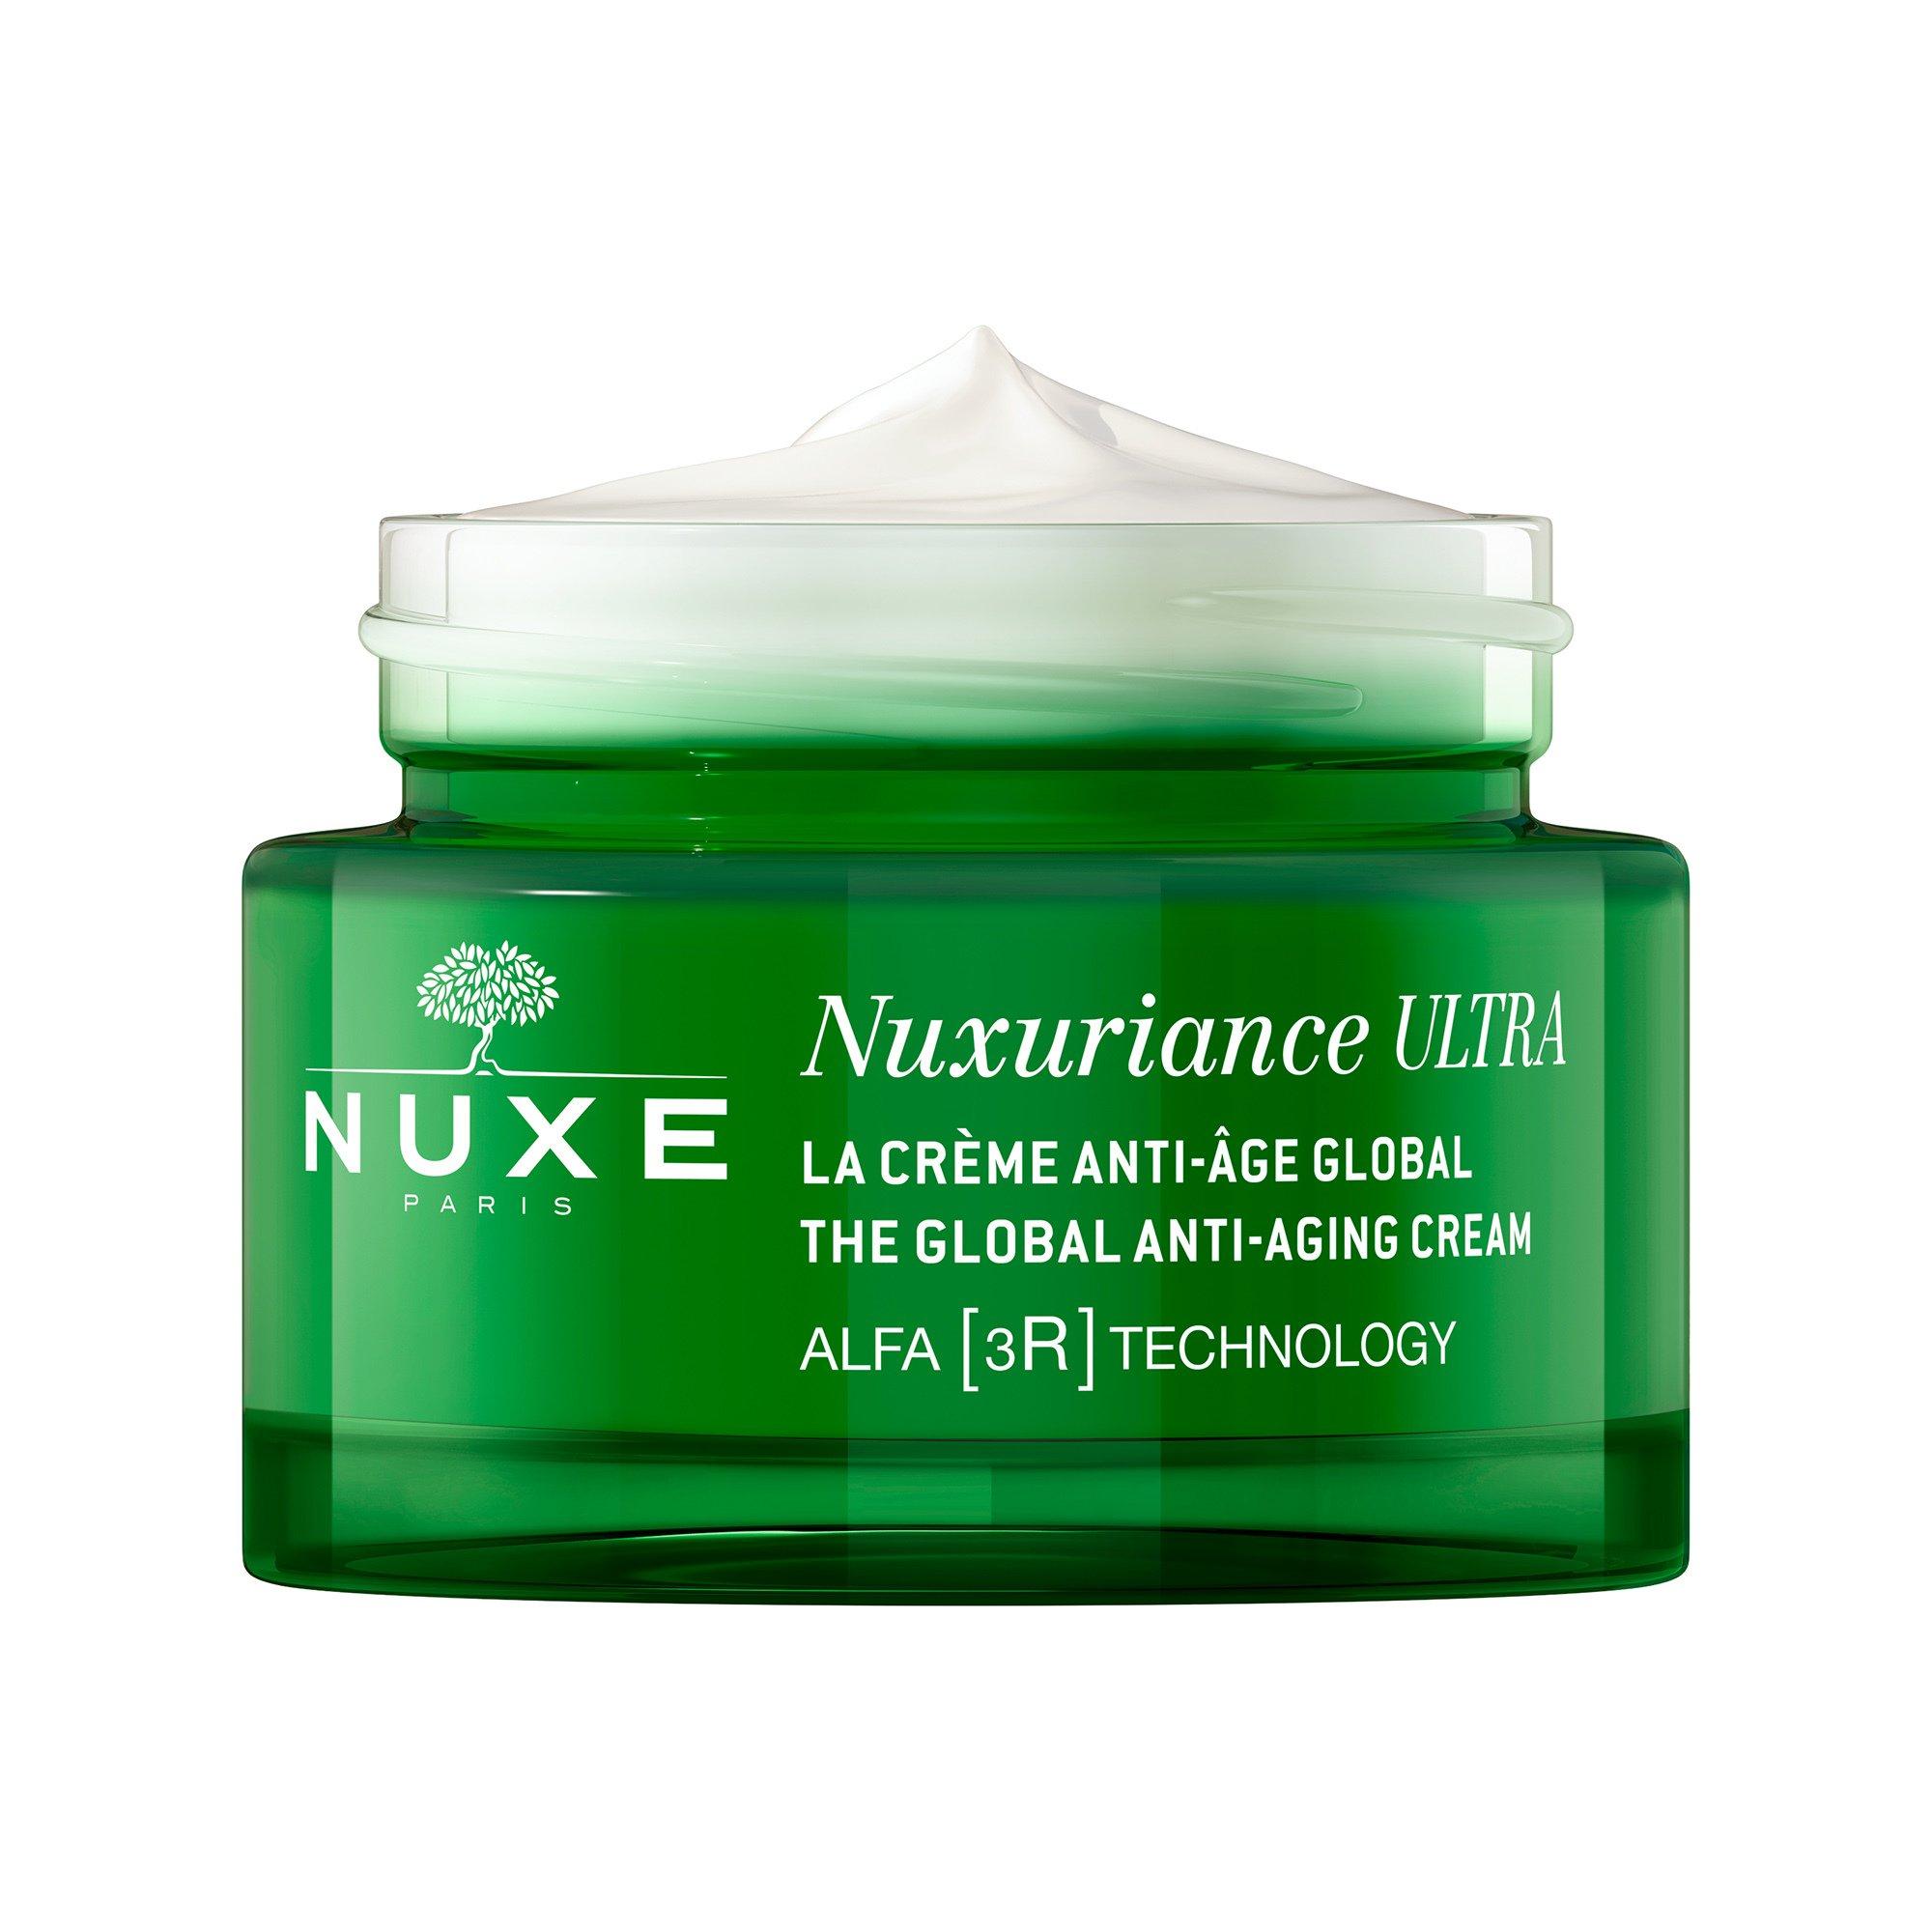 NUXE  Nuxuriance Ultra, Die Globale Anti-Aging-Creme 